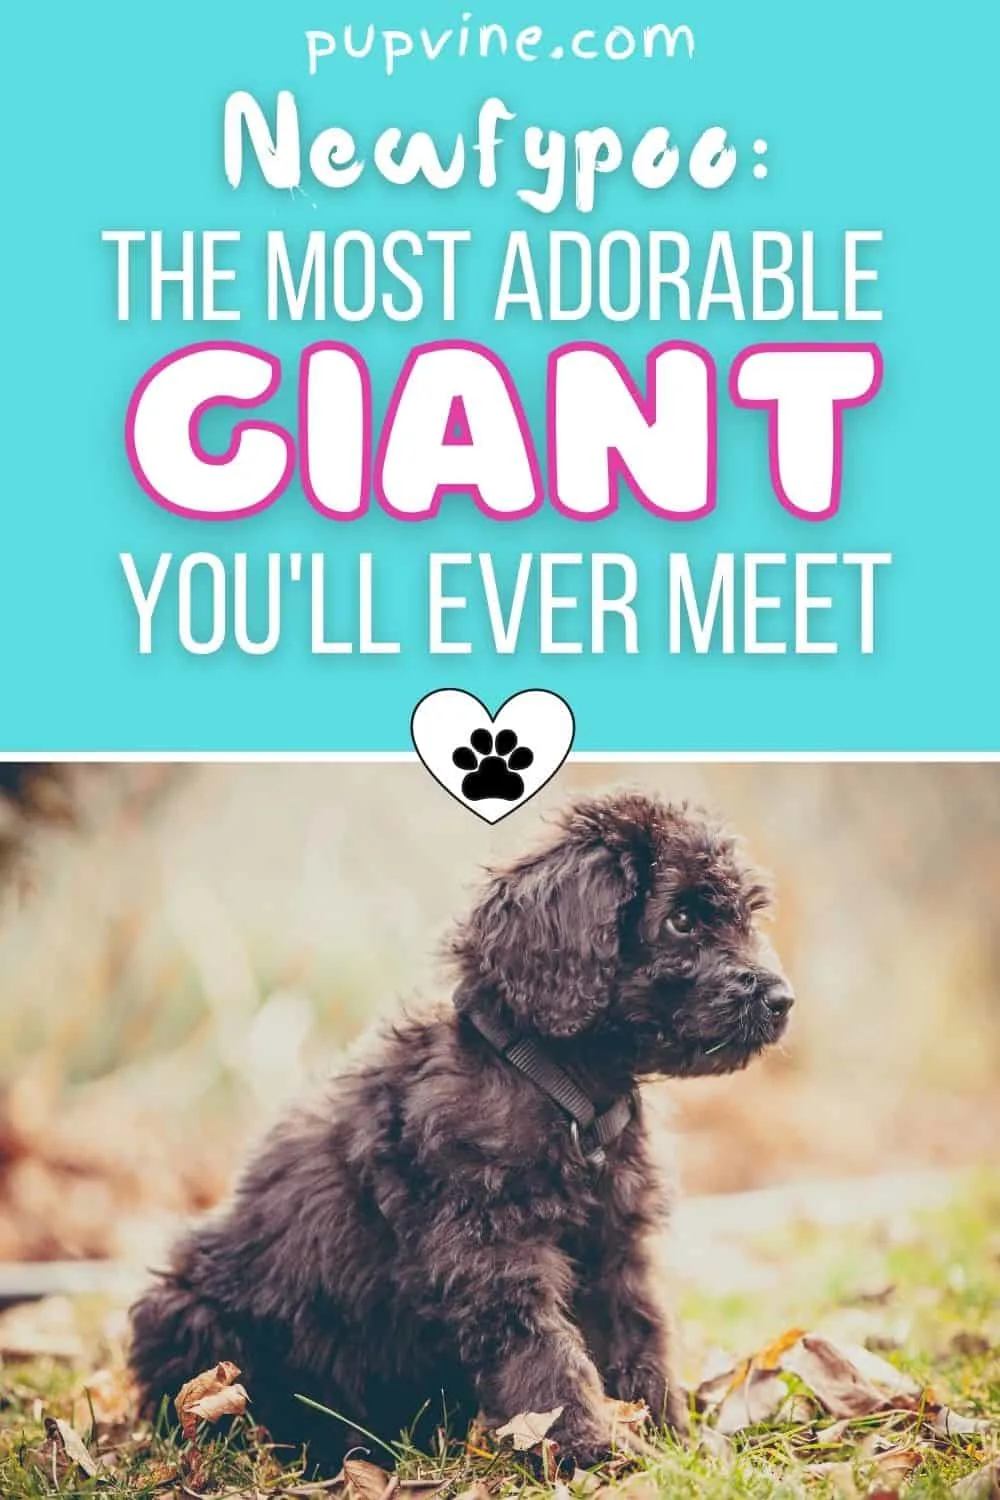 Newfypoo: The Most Adorable Giant You'll Ever Meet